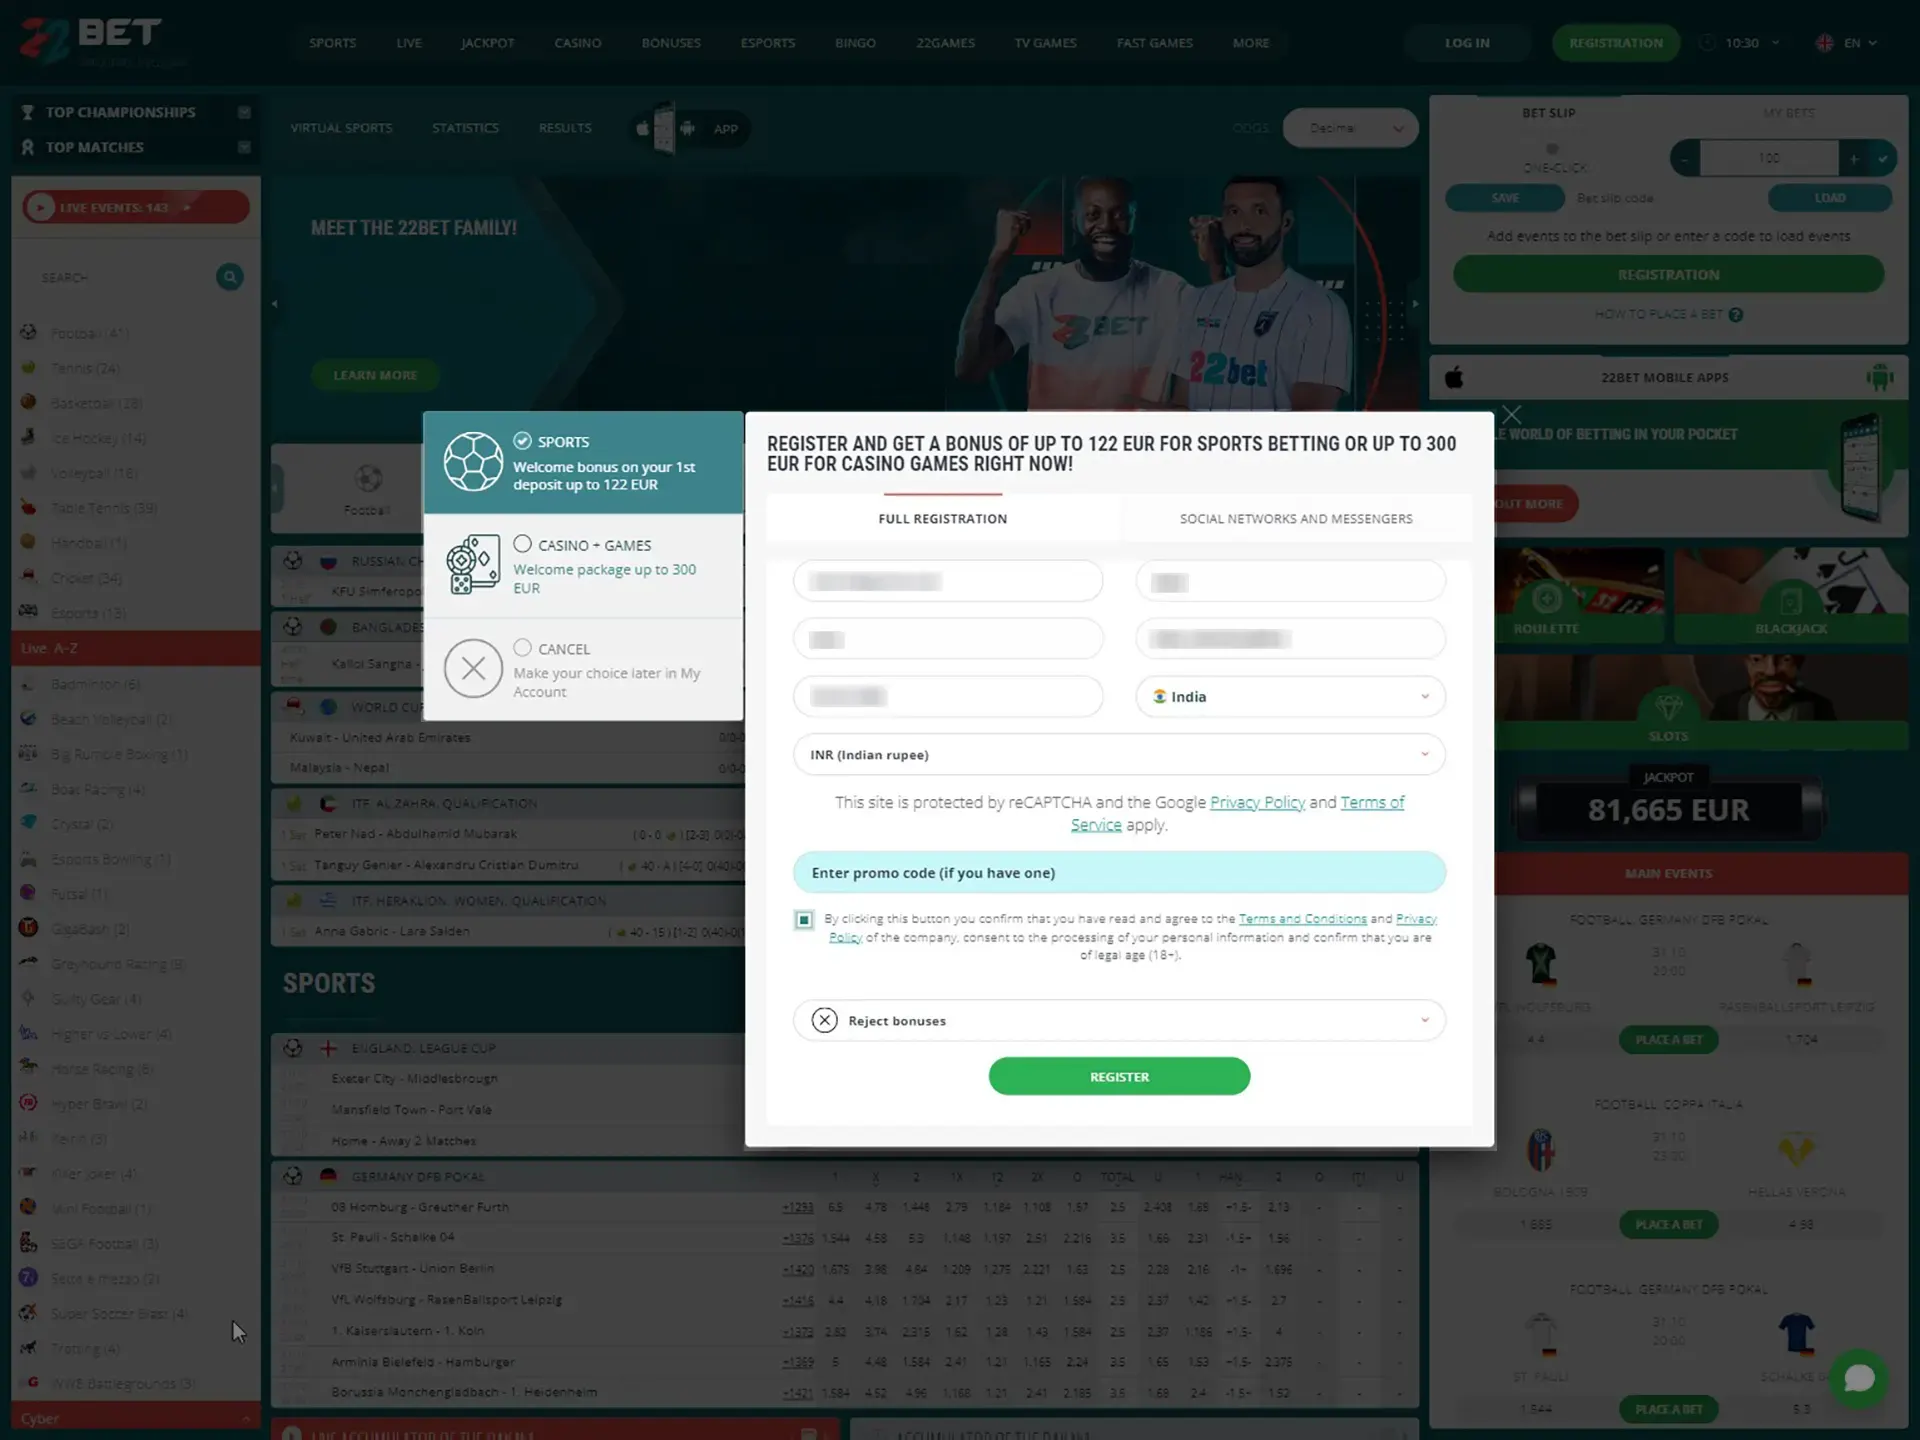 Sign up on the 22Bet website.